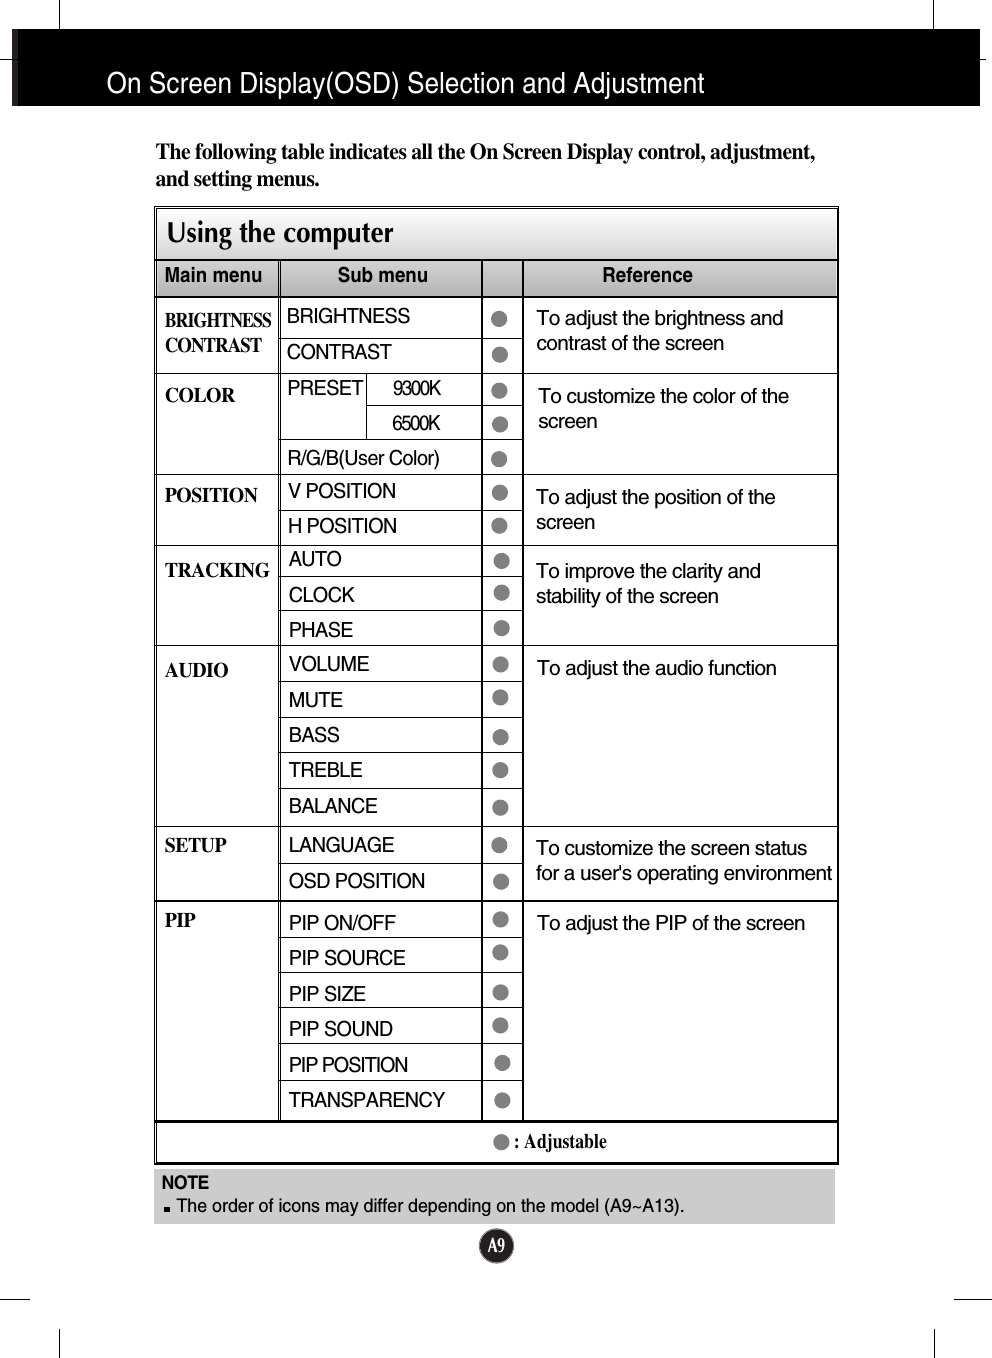 A9NOTEThe order of icons may differ depending on the model (A9~A13).On Screen Display(OSD) Selection and Adjustment The following table indicates all the On Screen Display control, adjustment,and setting menus.To adjust the brightness andcontrast of the screenBRIGHTNESSCONTRASTCOLORPOSITIONTRACKINGAUDIOSETUPPIPUsing the computerMain menu Sub menu ReferencePRESET   9300K6500KR/G/B(User Color)To adjust the position of thescreen To customize the color of thescreenTo customize the screen statusfor a user&apos;s operating environmentTo improve the clarity andstability of the screen : AdjustableBRIGHTNESSCONTRASTV POSITIONH POSITIONAUTOCLOCKPHASELANGUAGEOSD POSITIONTo adjust the audio functionVOLUMEMUTEBASSTREBLEBALANCETo adjust the PIP of the screenPIP ON/OFFPIP SOURCEPIP SIZEPIP SOUNDPIP POSITIONTRANSPARENCY